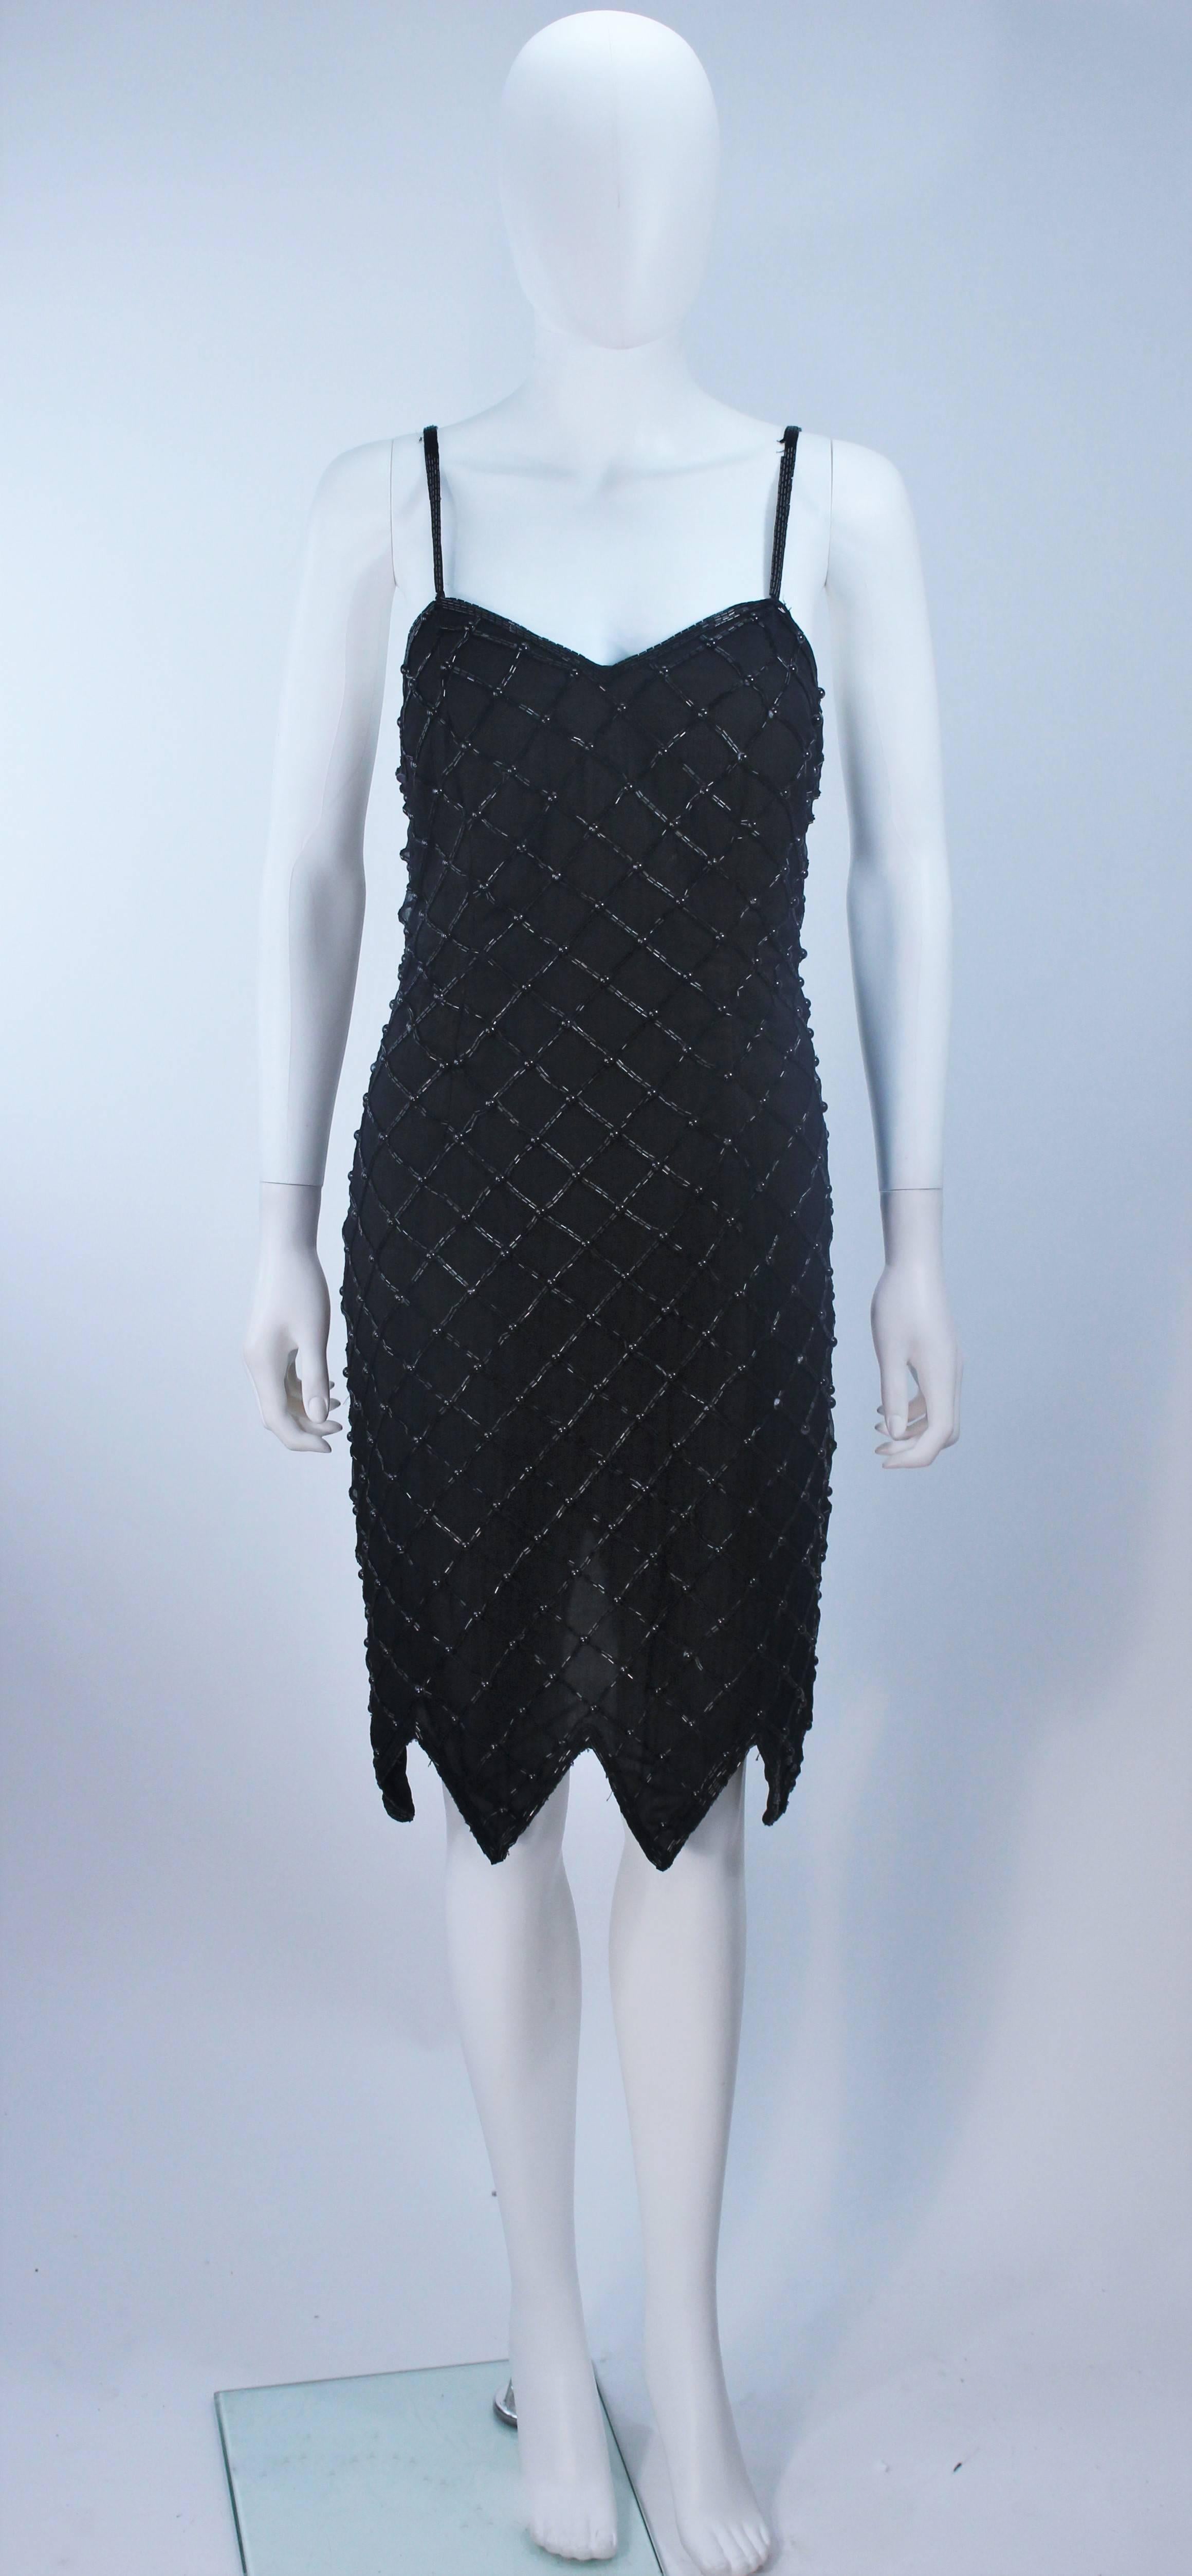  This cocktail dress is composed of a beaded black rayon with a scalloped hem. There is a zipper closure. In good vintage condition, some wear to beading.

  **Please cross-reference measurements for personal accuracy. 

Measures